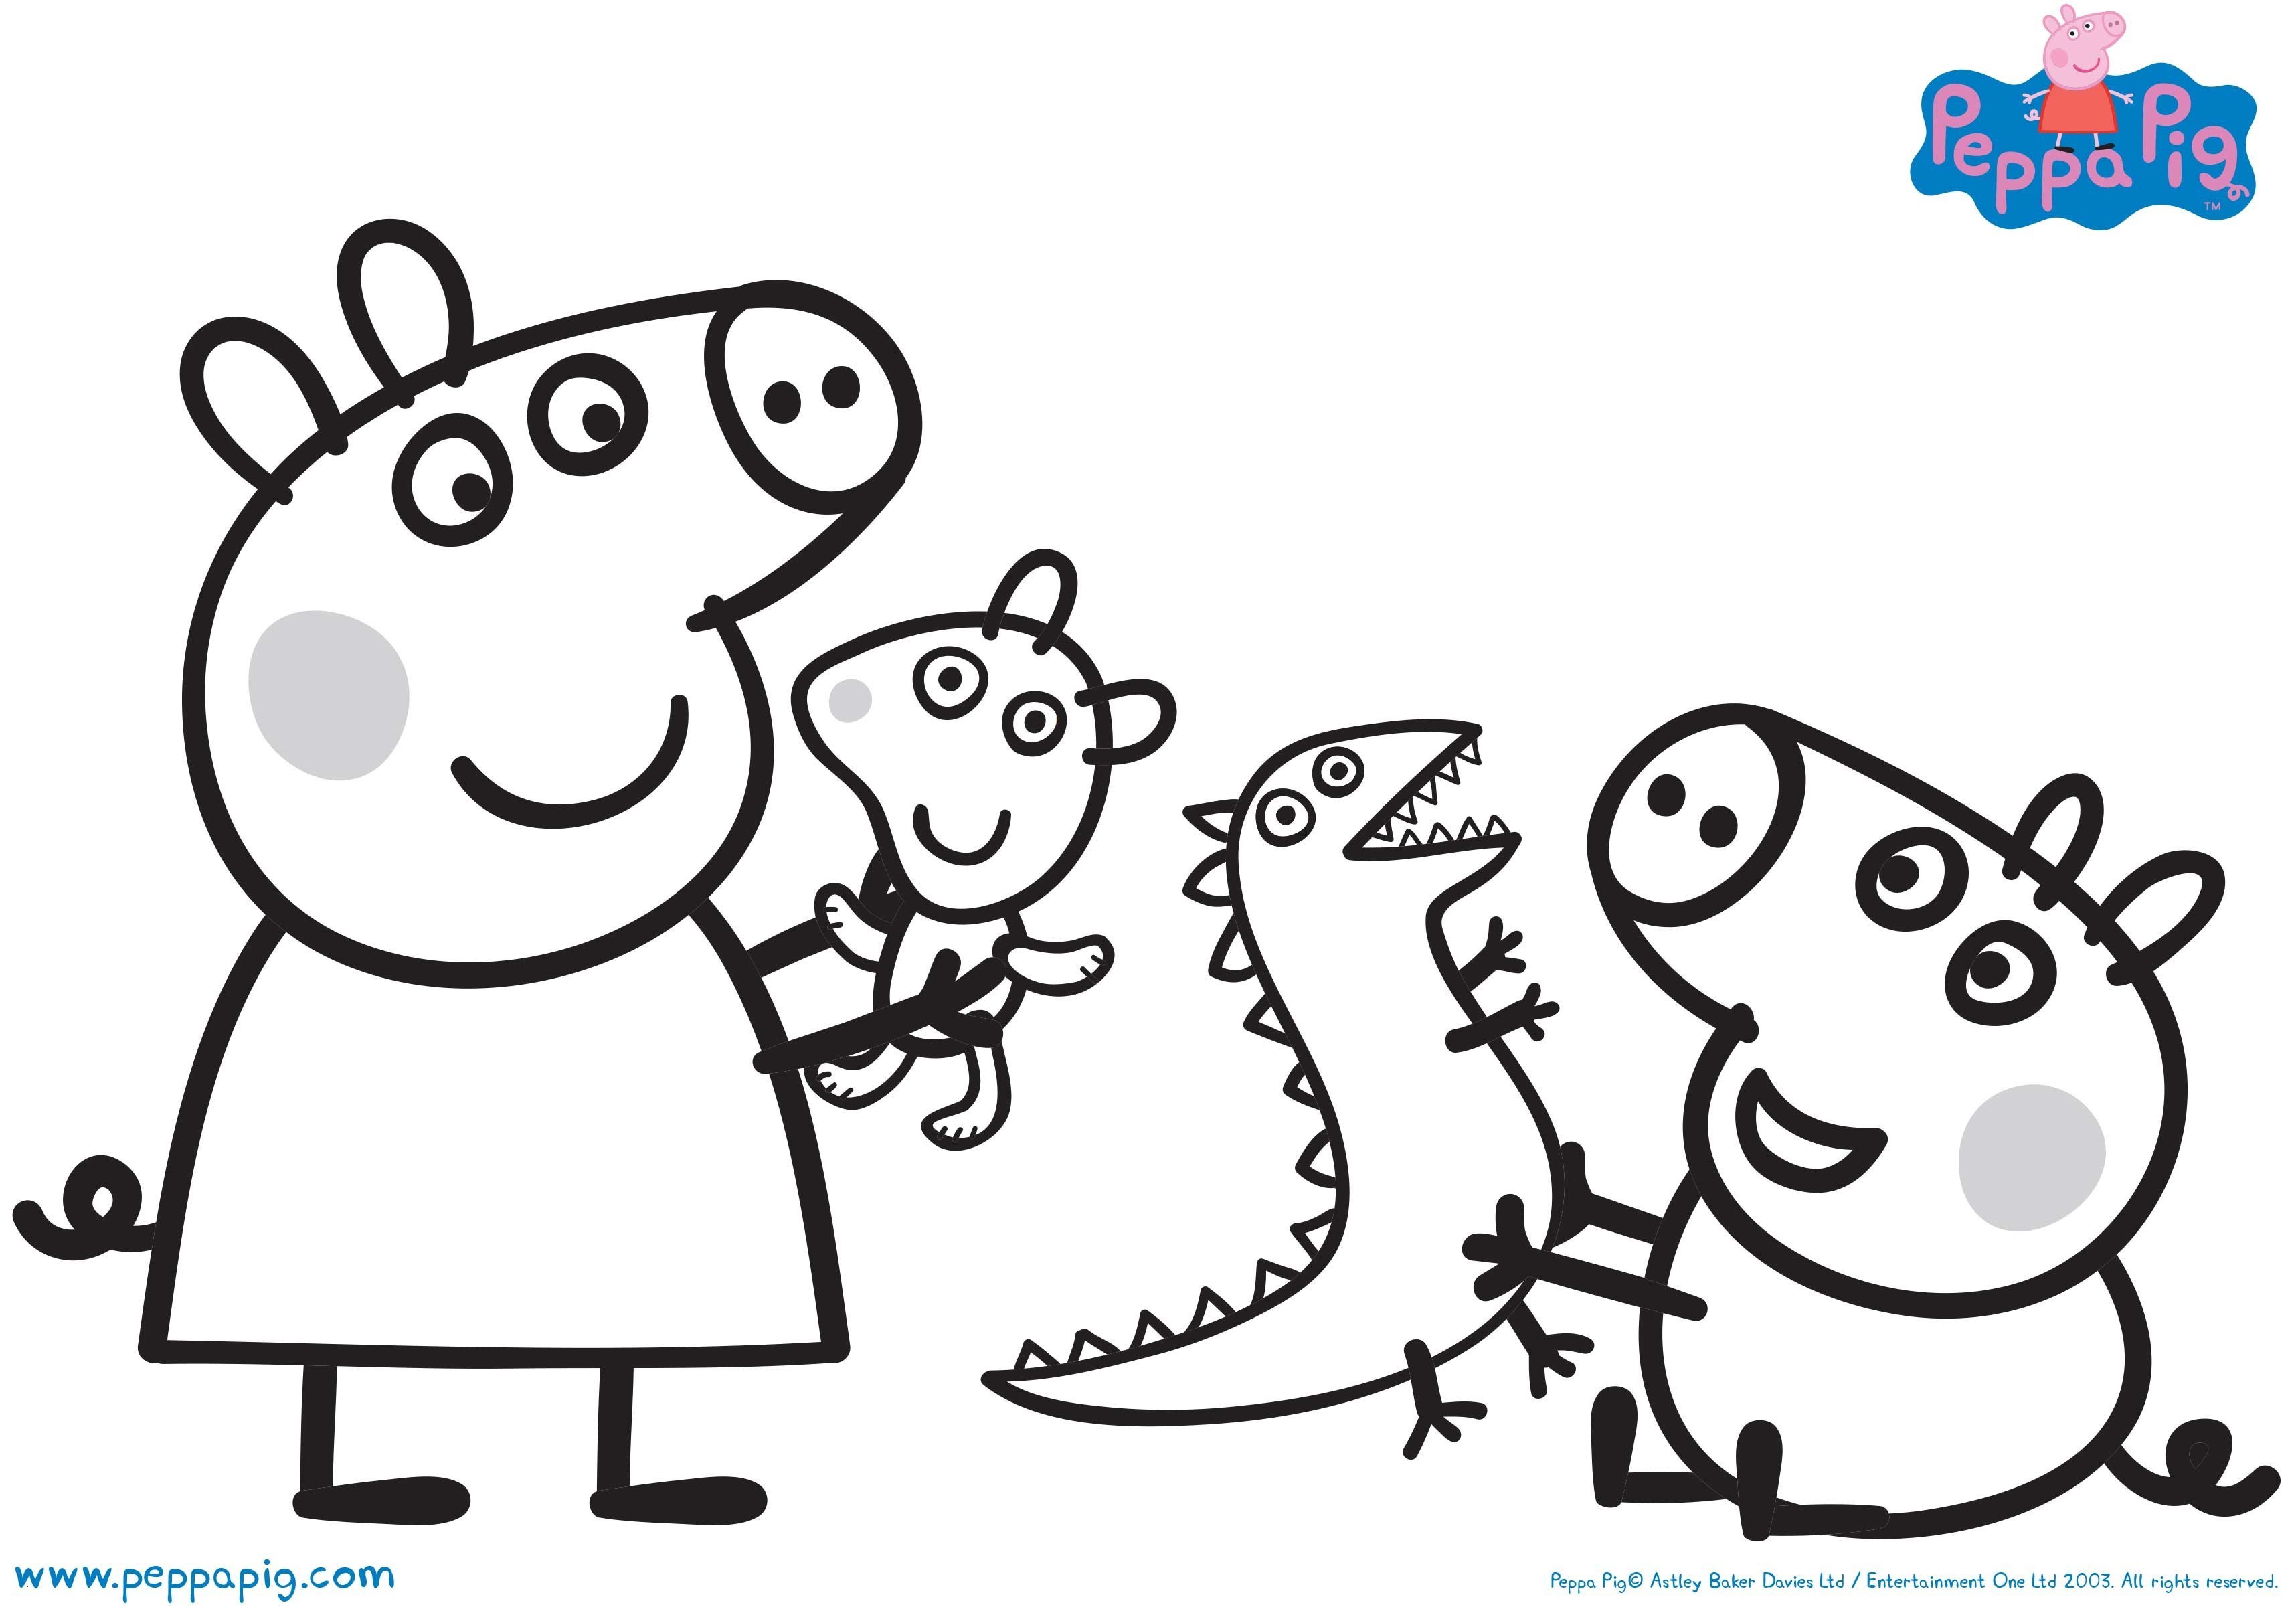 Www.peppa Pig Coloring Pages - BubaKids.com